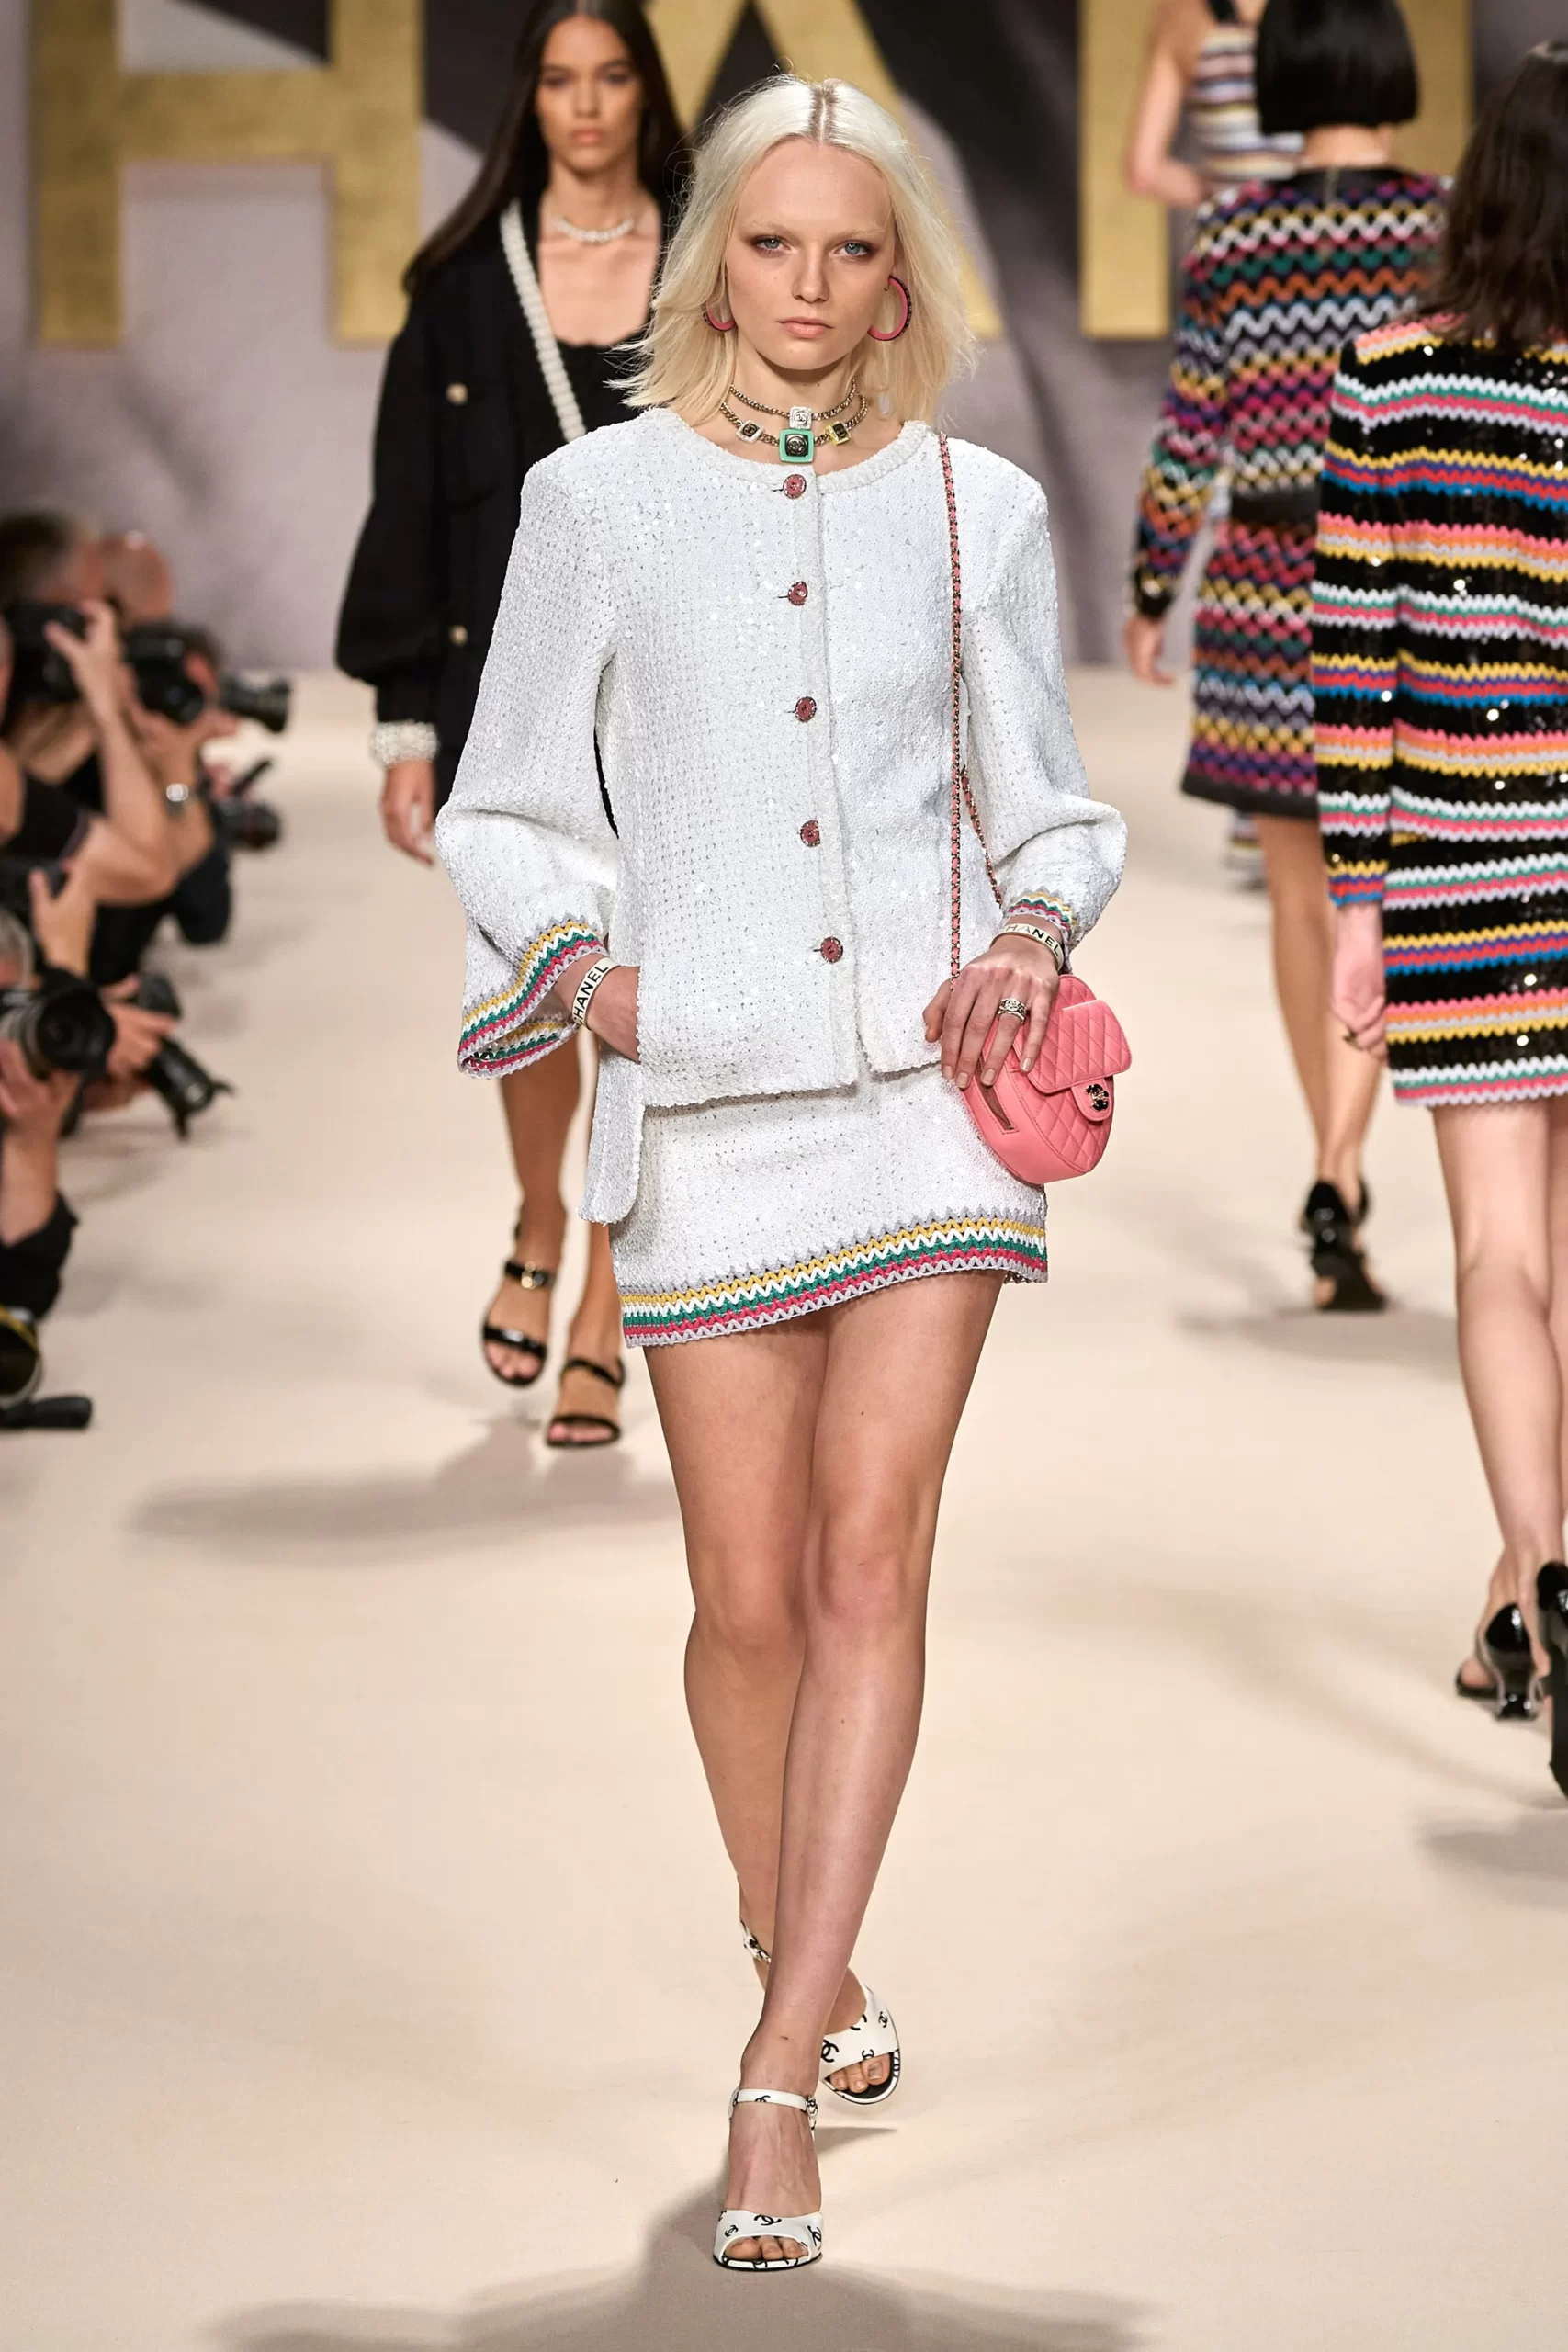 Every Chanel bag we loved from the Spring/Summer 2022 fashion show